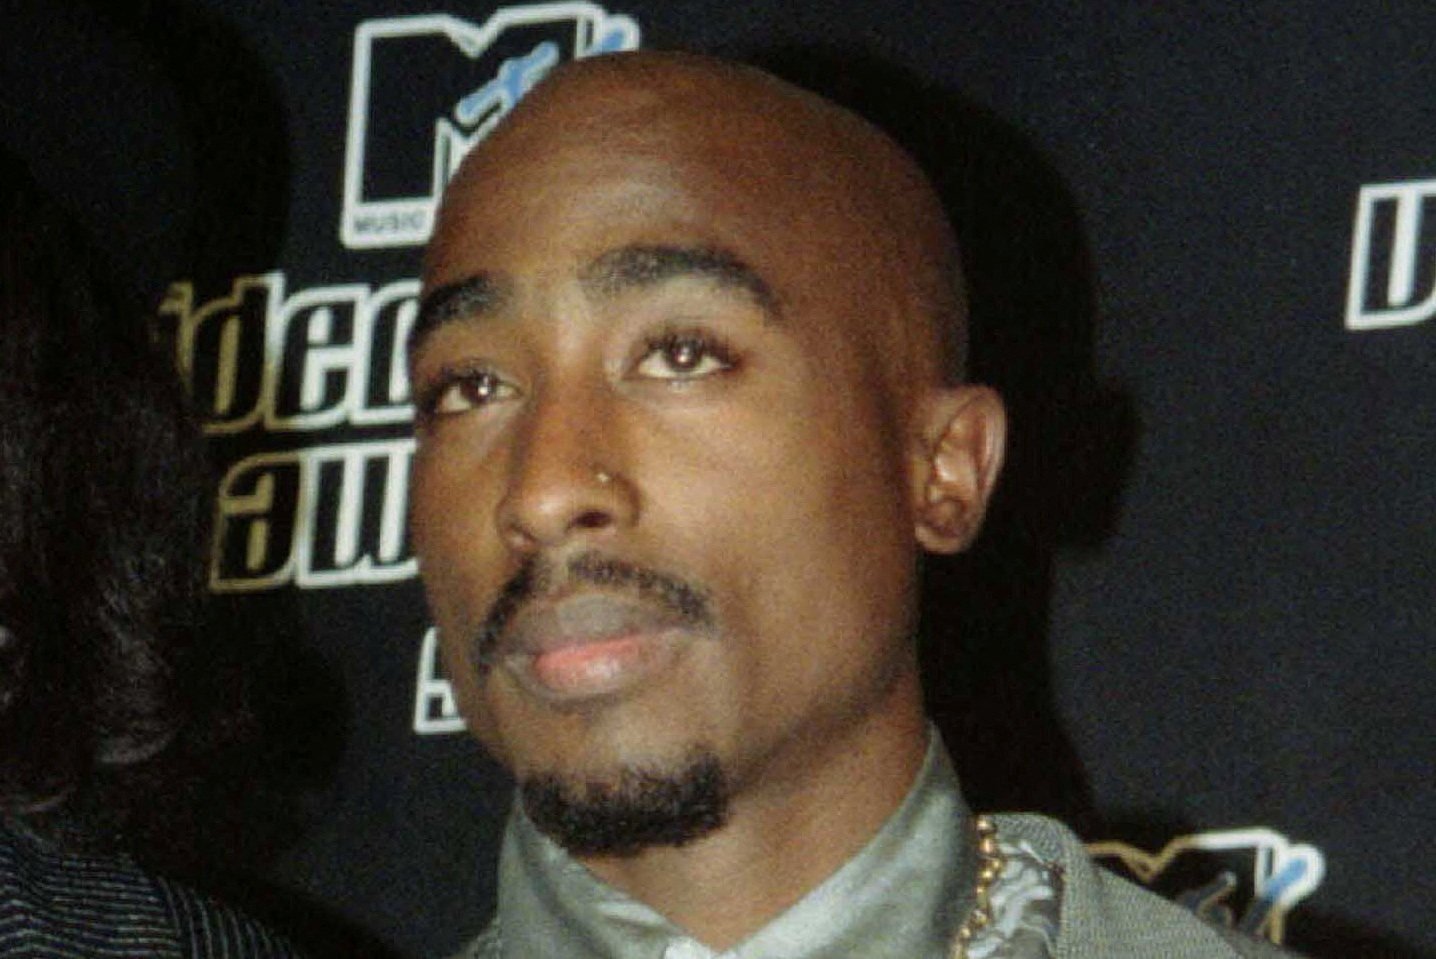 US rapper Tupac Shakur is seen at the MTV Music Video Awards in New York in September 1996. Photo: Reuters